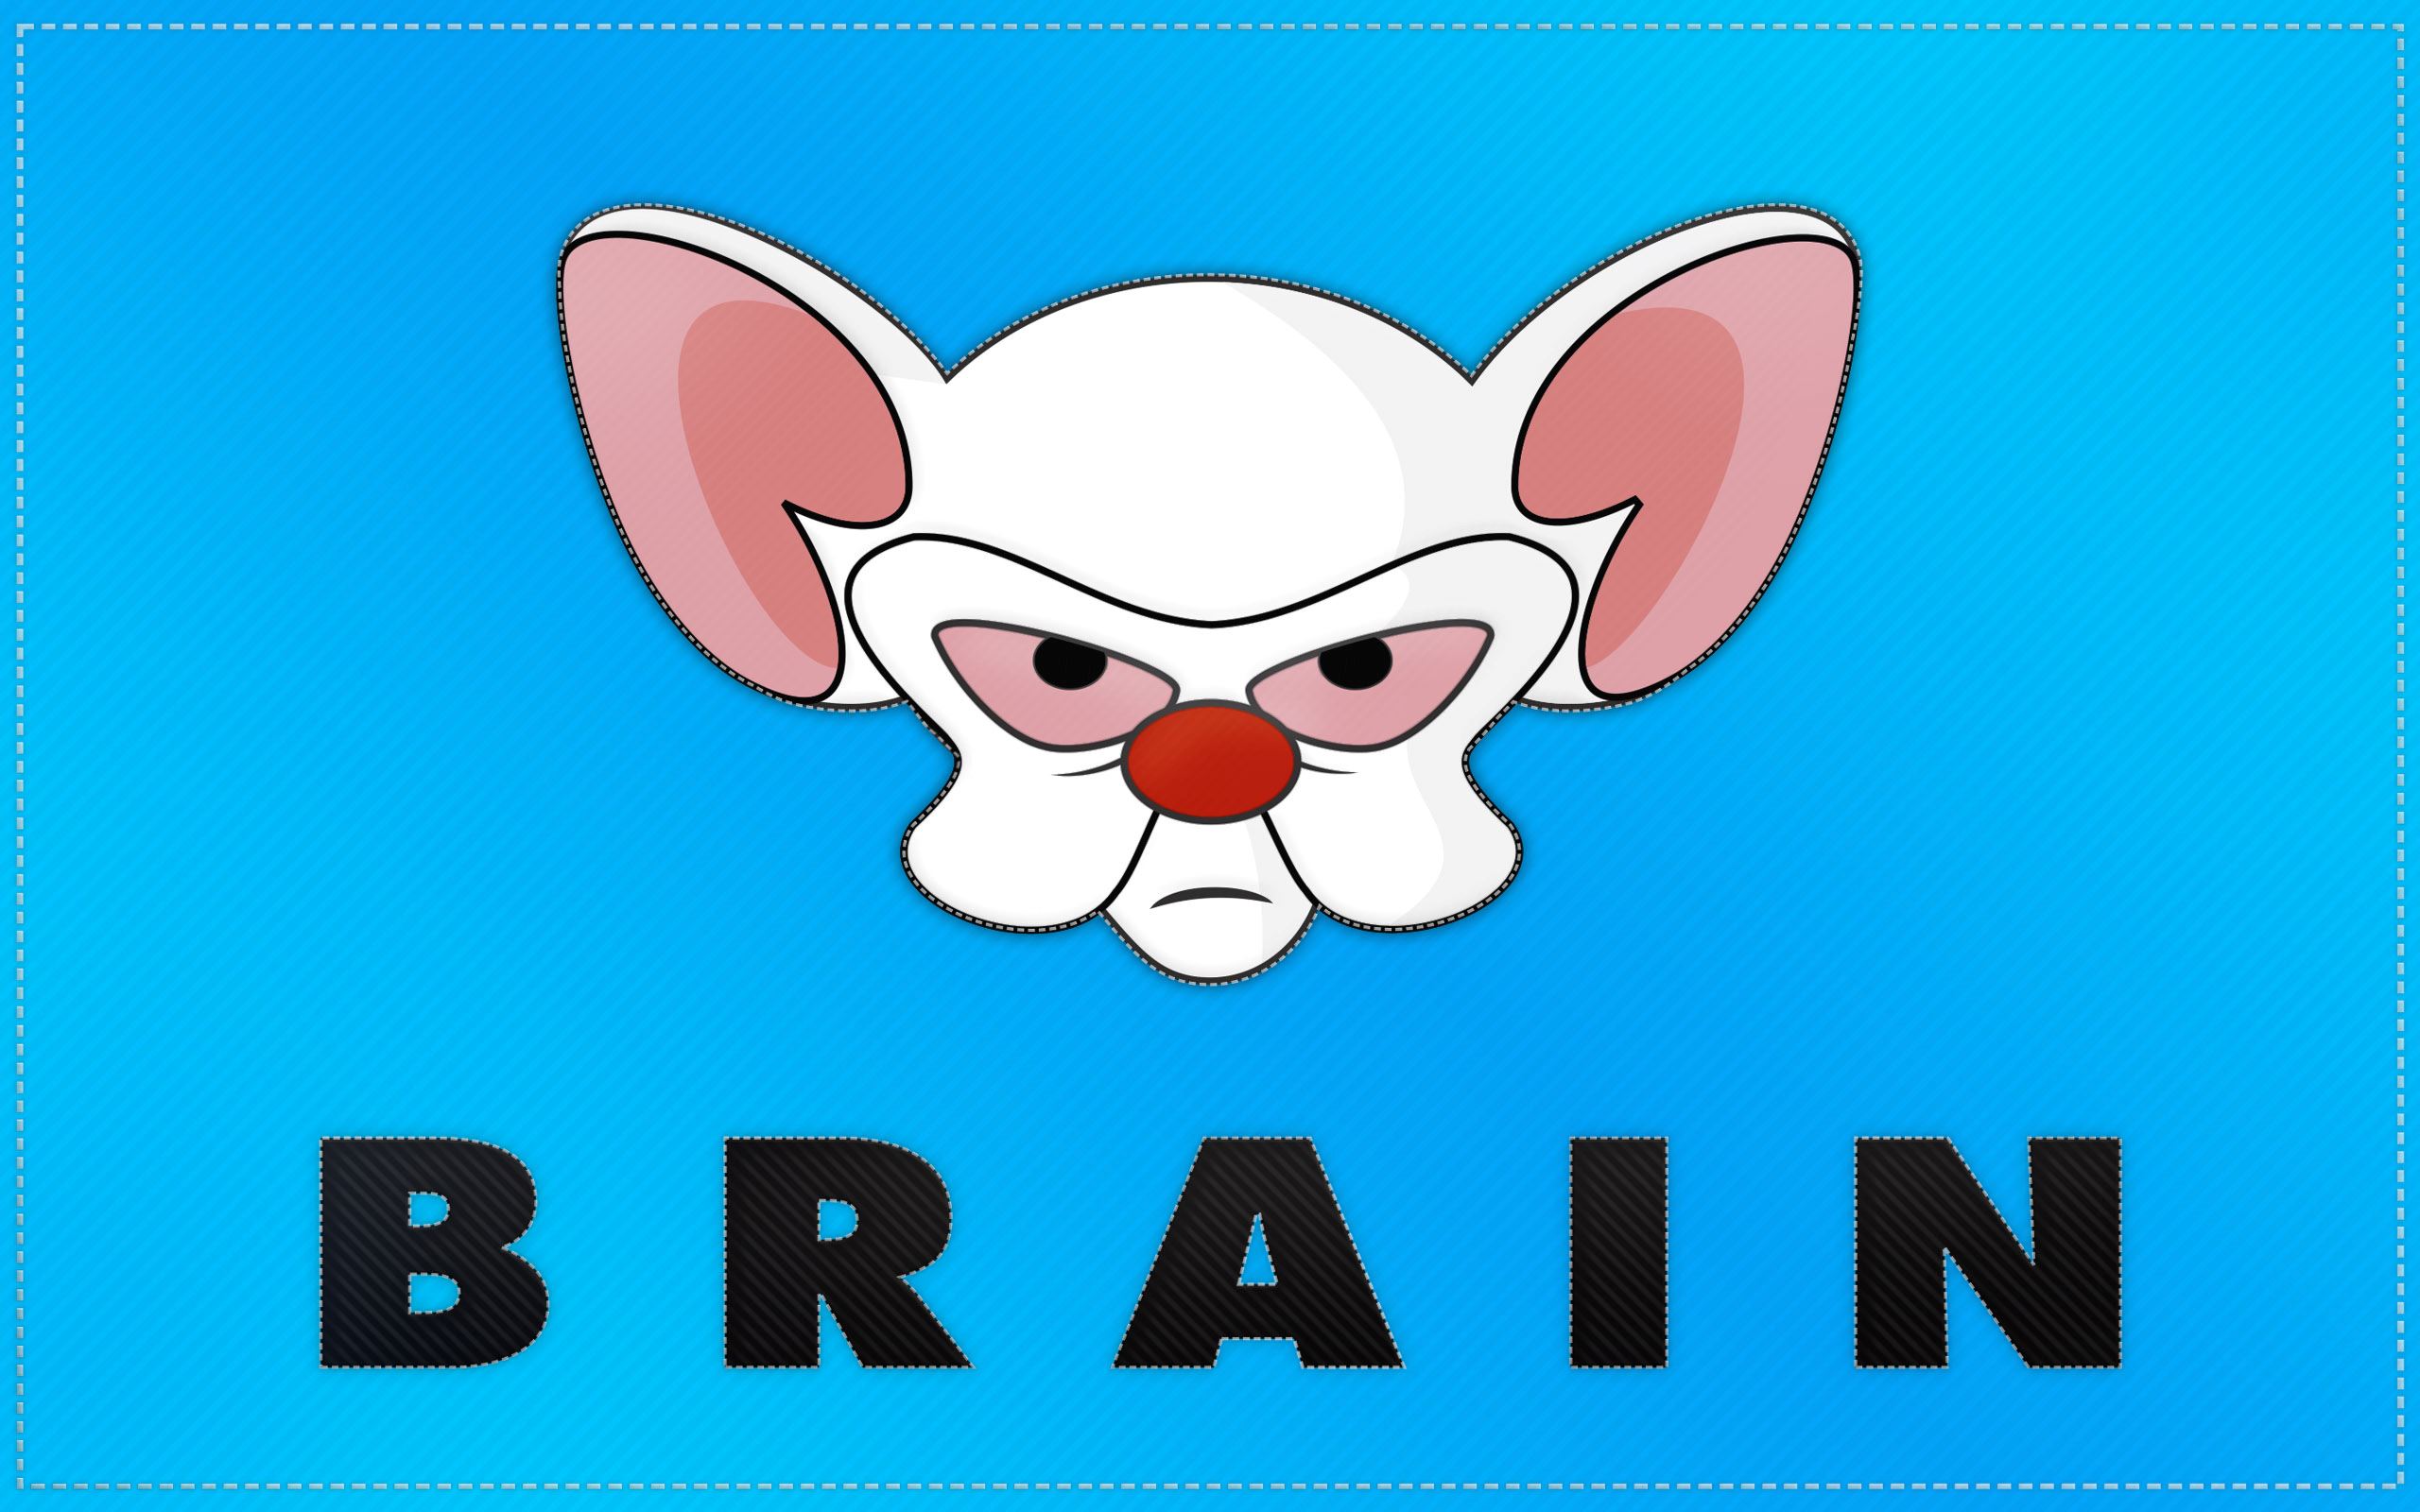 17-facts-about-brain-pinky-and-the-brain